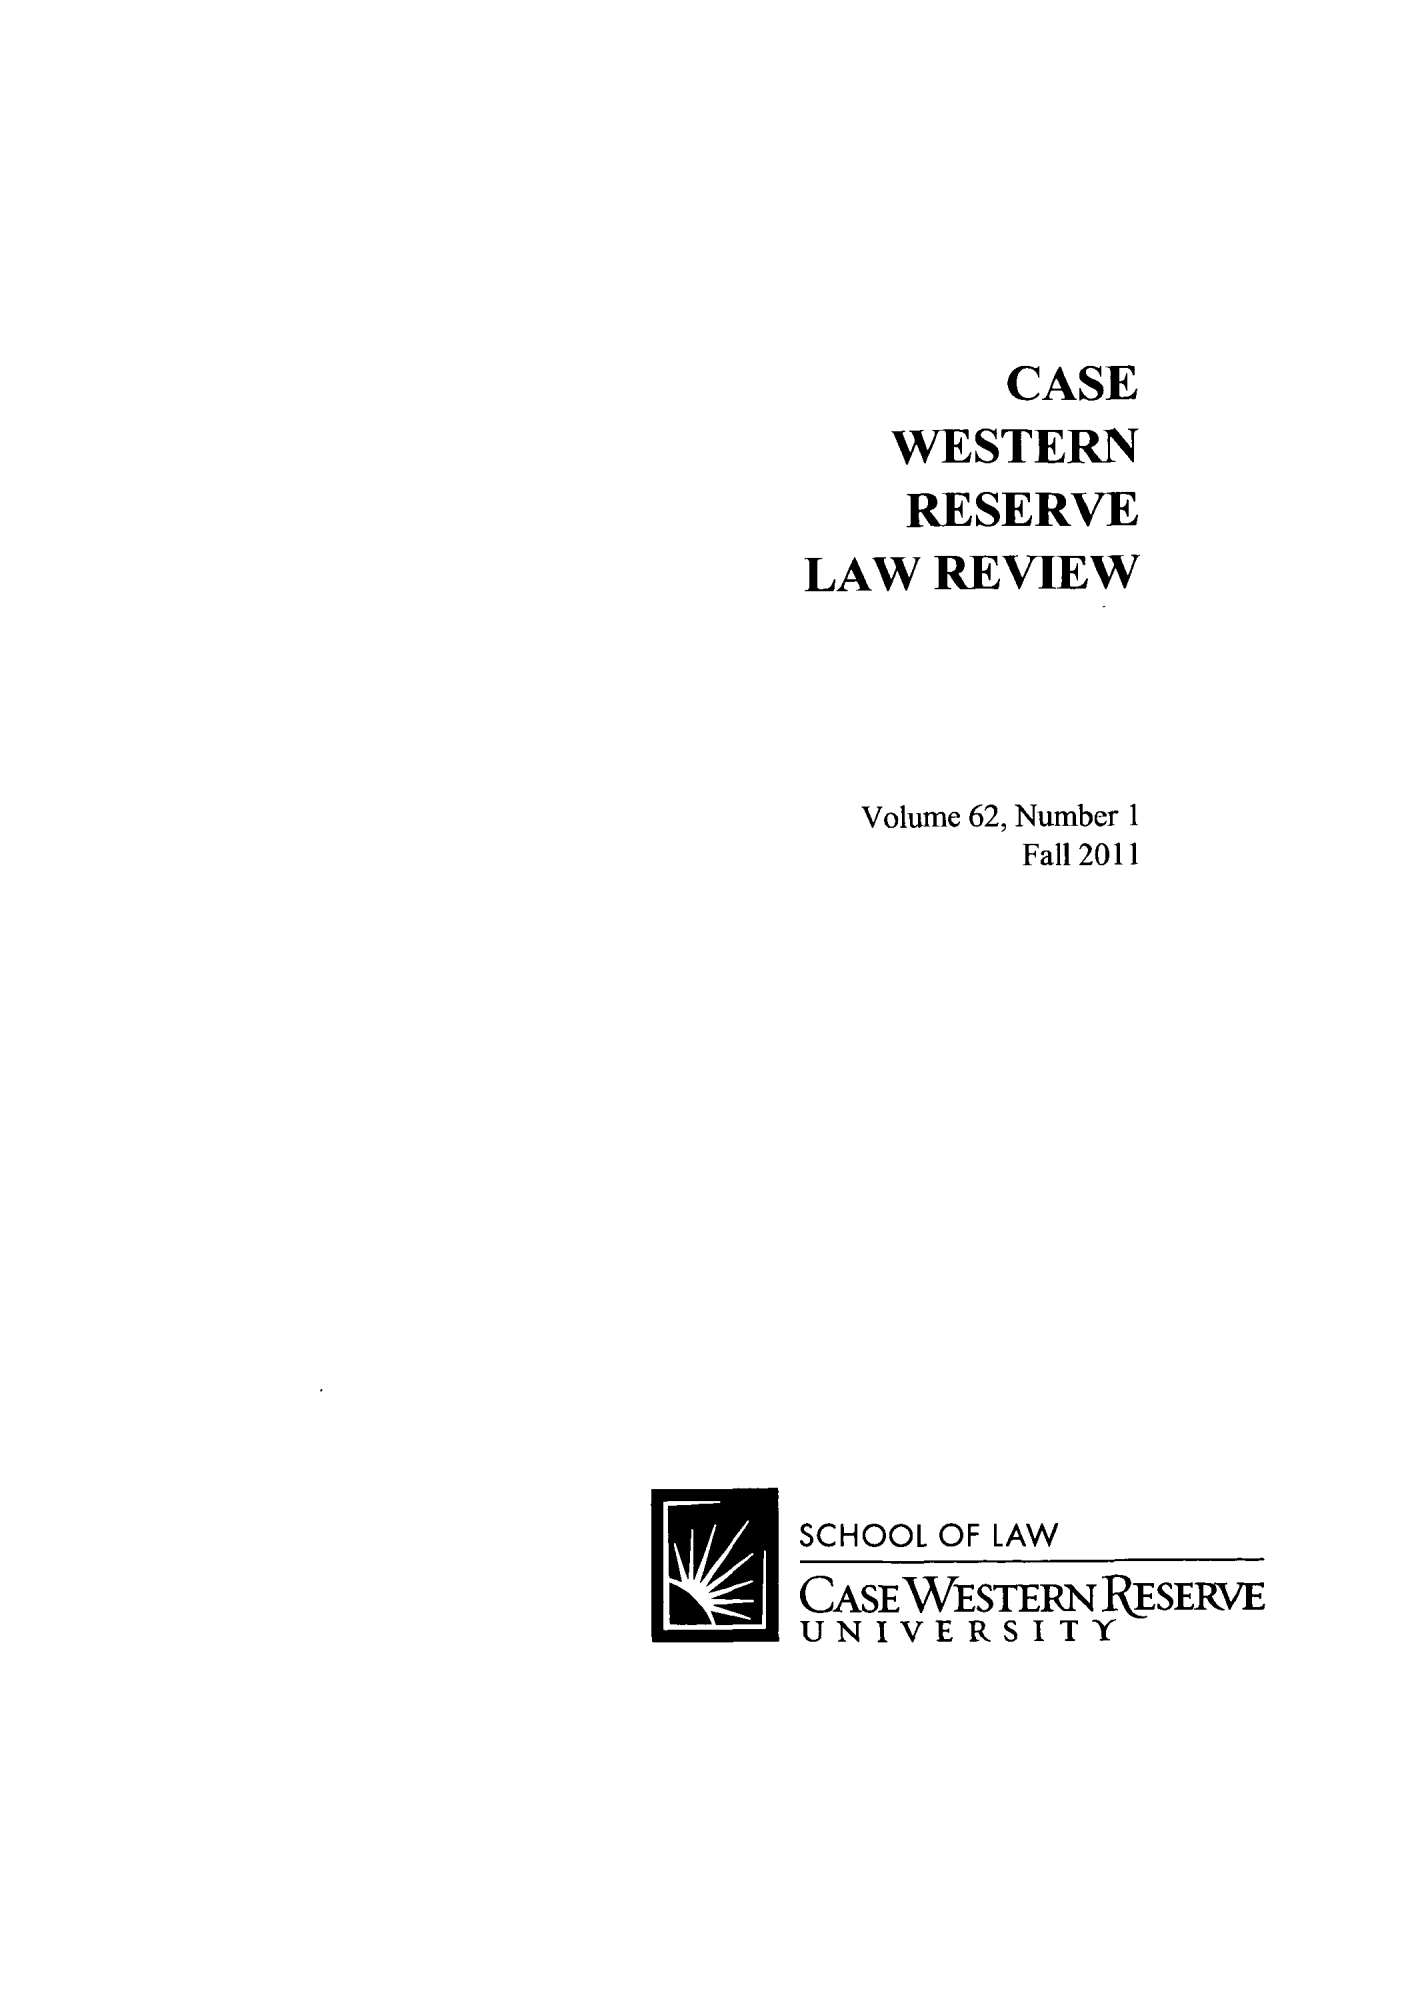 handle is hein.journals/cwrlrv62 and id is 1 raw text is: CASE
WESTERN
RESERVE
LAW REVIEW
Volume 62, Number 1
Fall 2011
SCHOOL OF LAW
CASEWESTER RSERVE
UNIVERSITY


